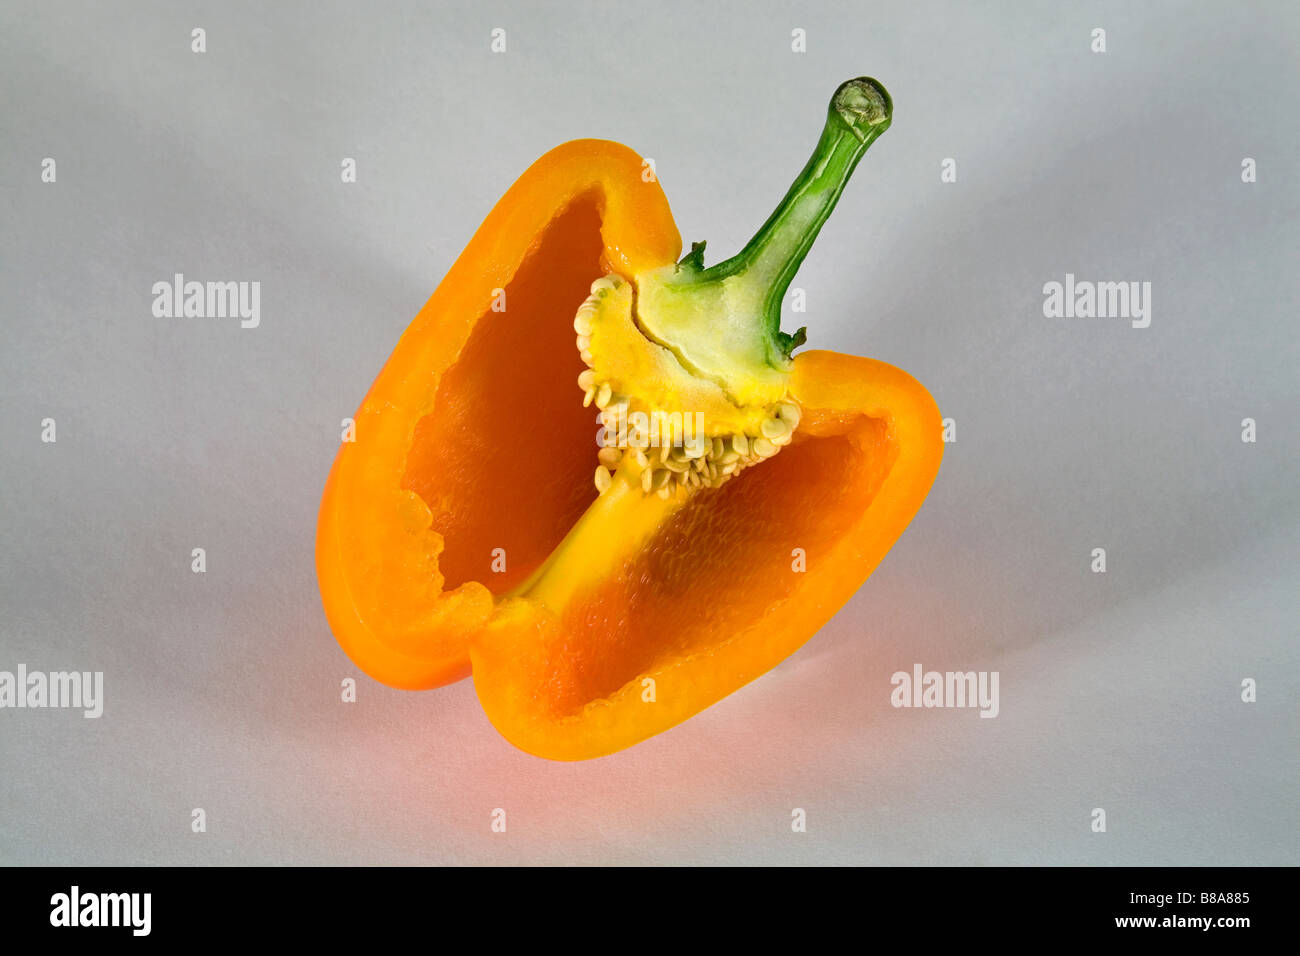 A yellow or orange bell pepper sliced or whole. Stock Photo